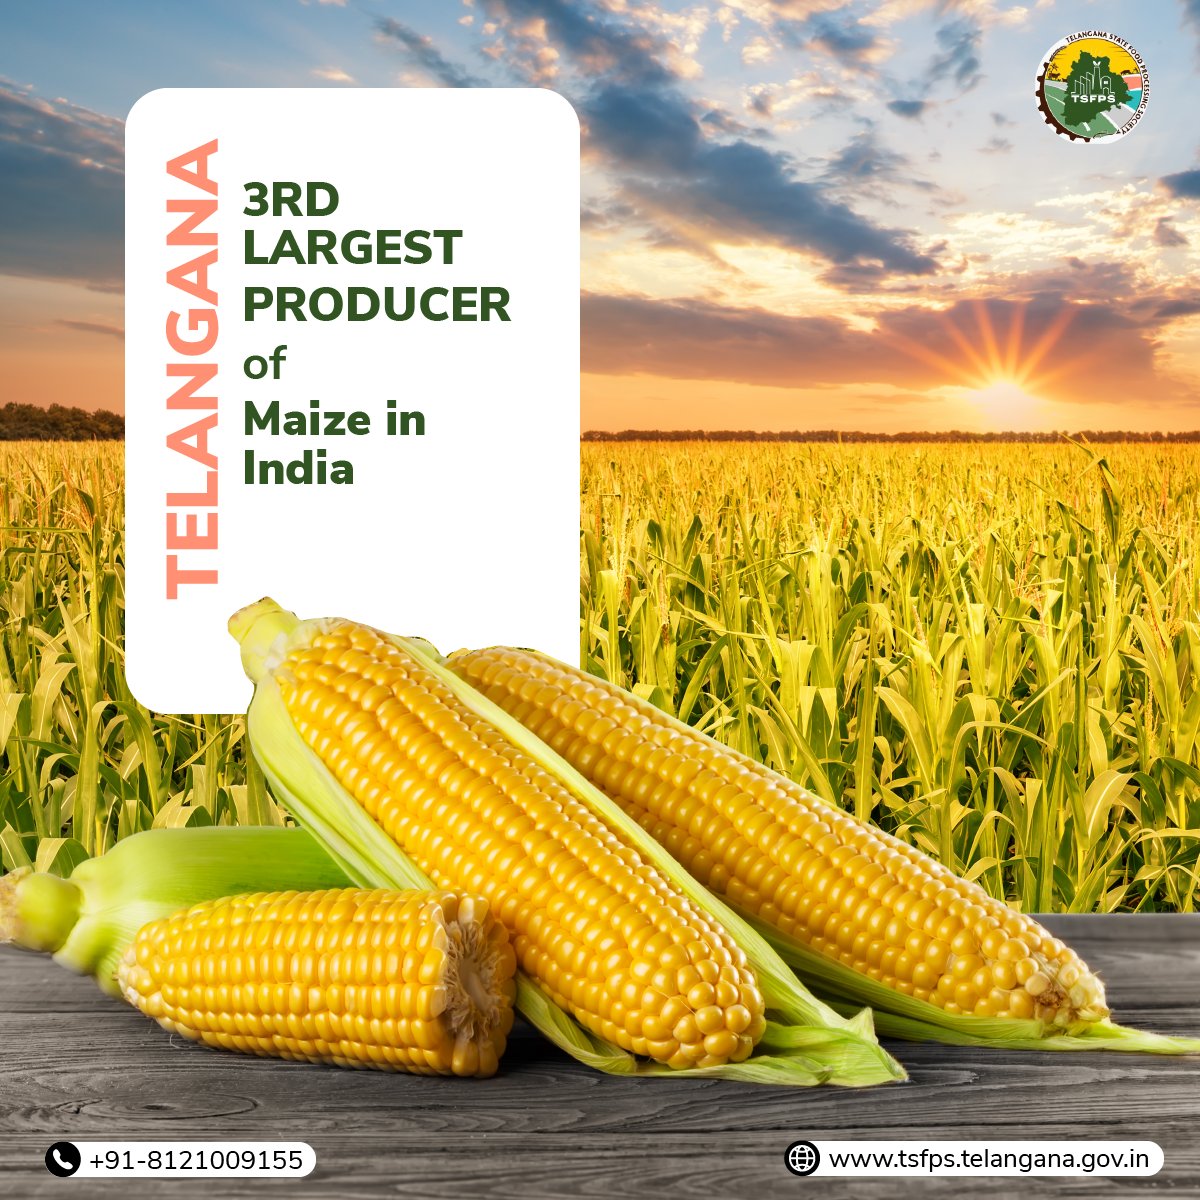 #Telangana’s cornucopia of #maizeprocessing possibilities. From the sweetness of #cornsyrup & #cornpudding to the crunch of #cornchips and #tortillas, the state transforms #maize into a rich array of products.
@MOFPI_GOI @jayesh_ranjan @AkhilGawar @investindia @TheFoodConclave